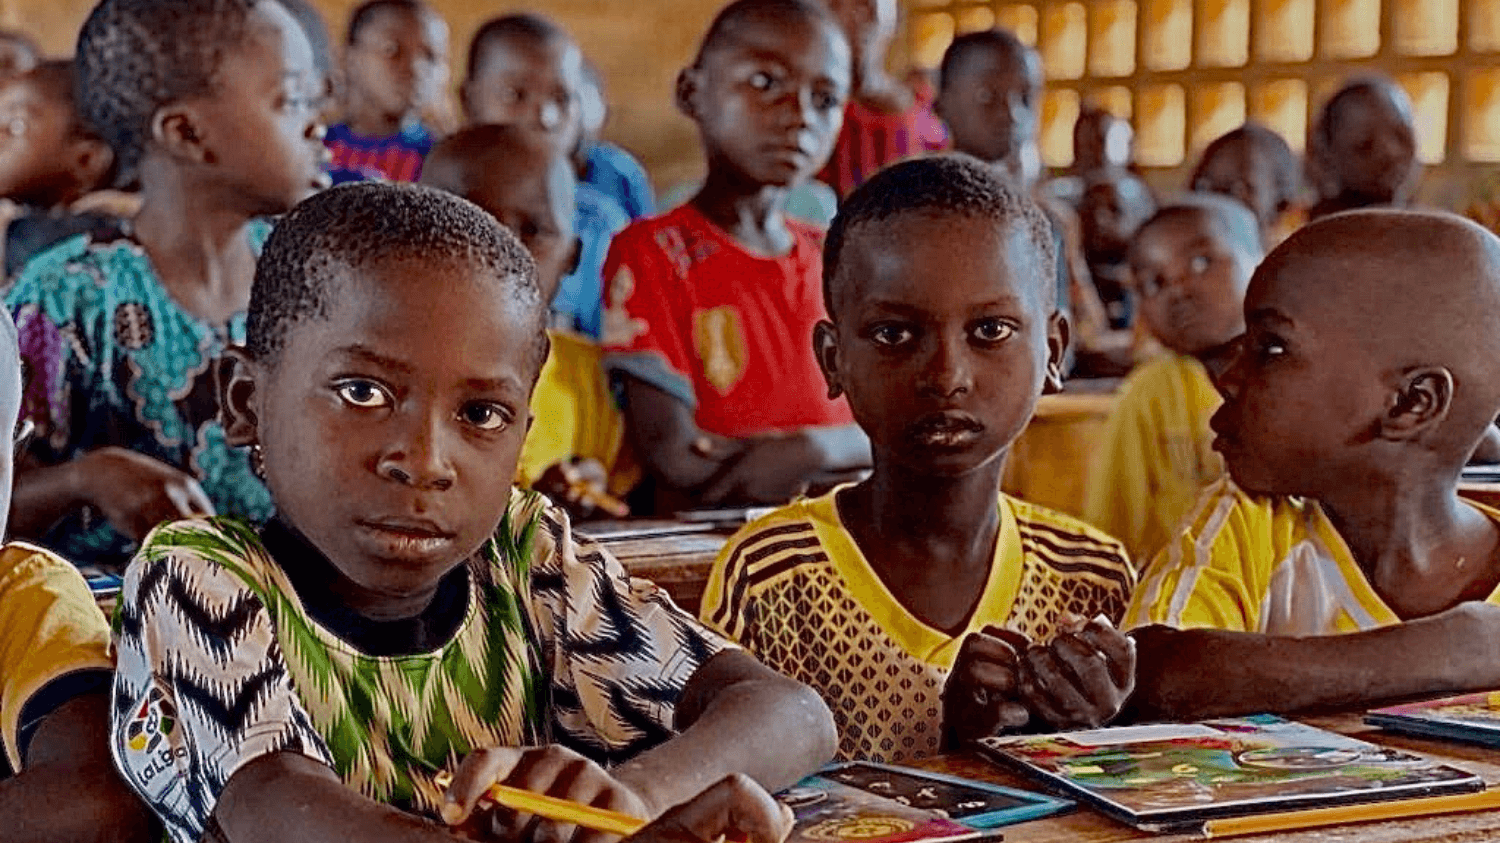 Cap Anamur has been building schools in the Central African Republic for years